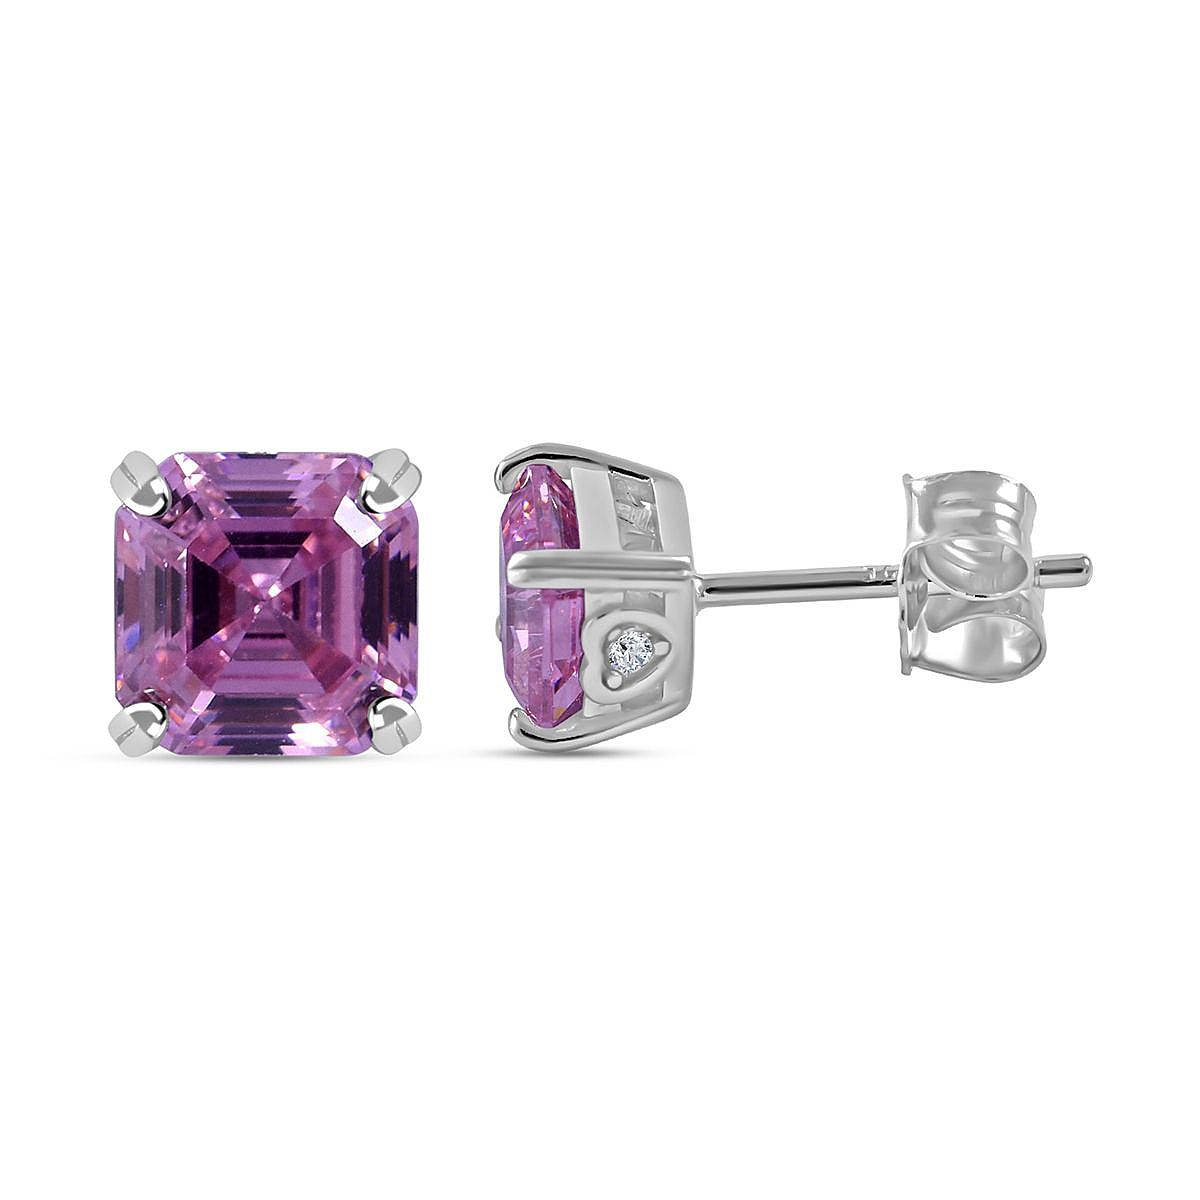 NY Close Out - Pink & White Cubic Zirconia Stud Earrings in Rhodium Overlay Sterling Silver